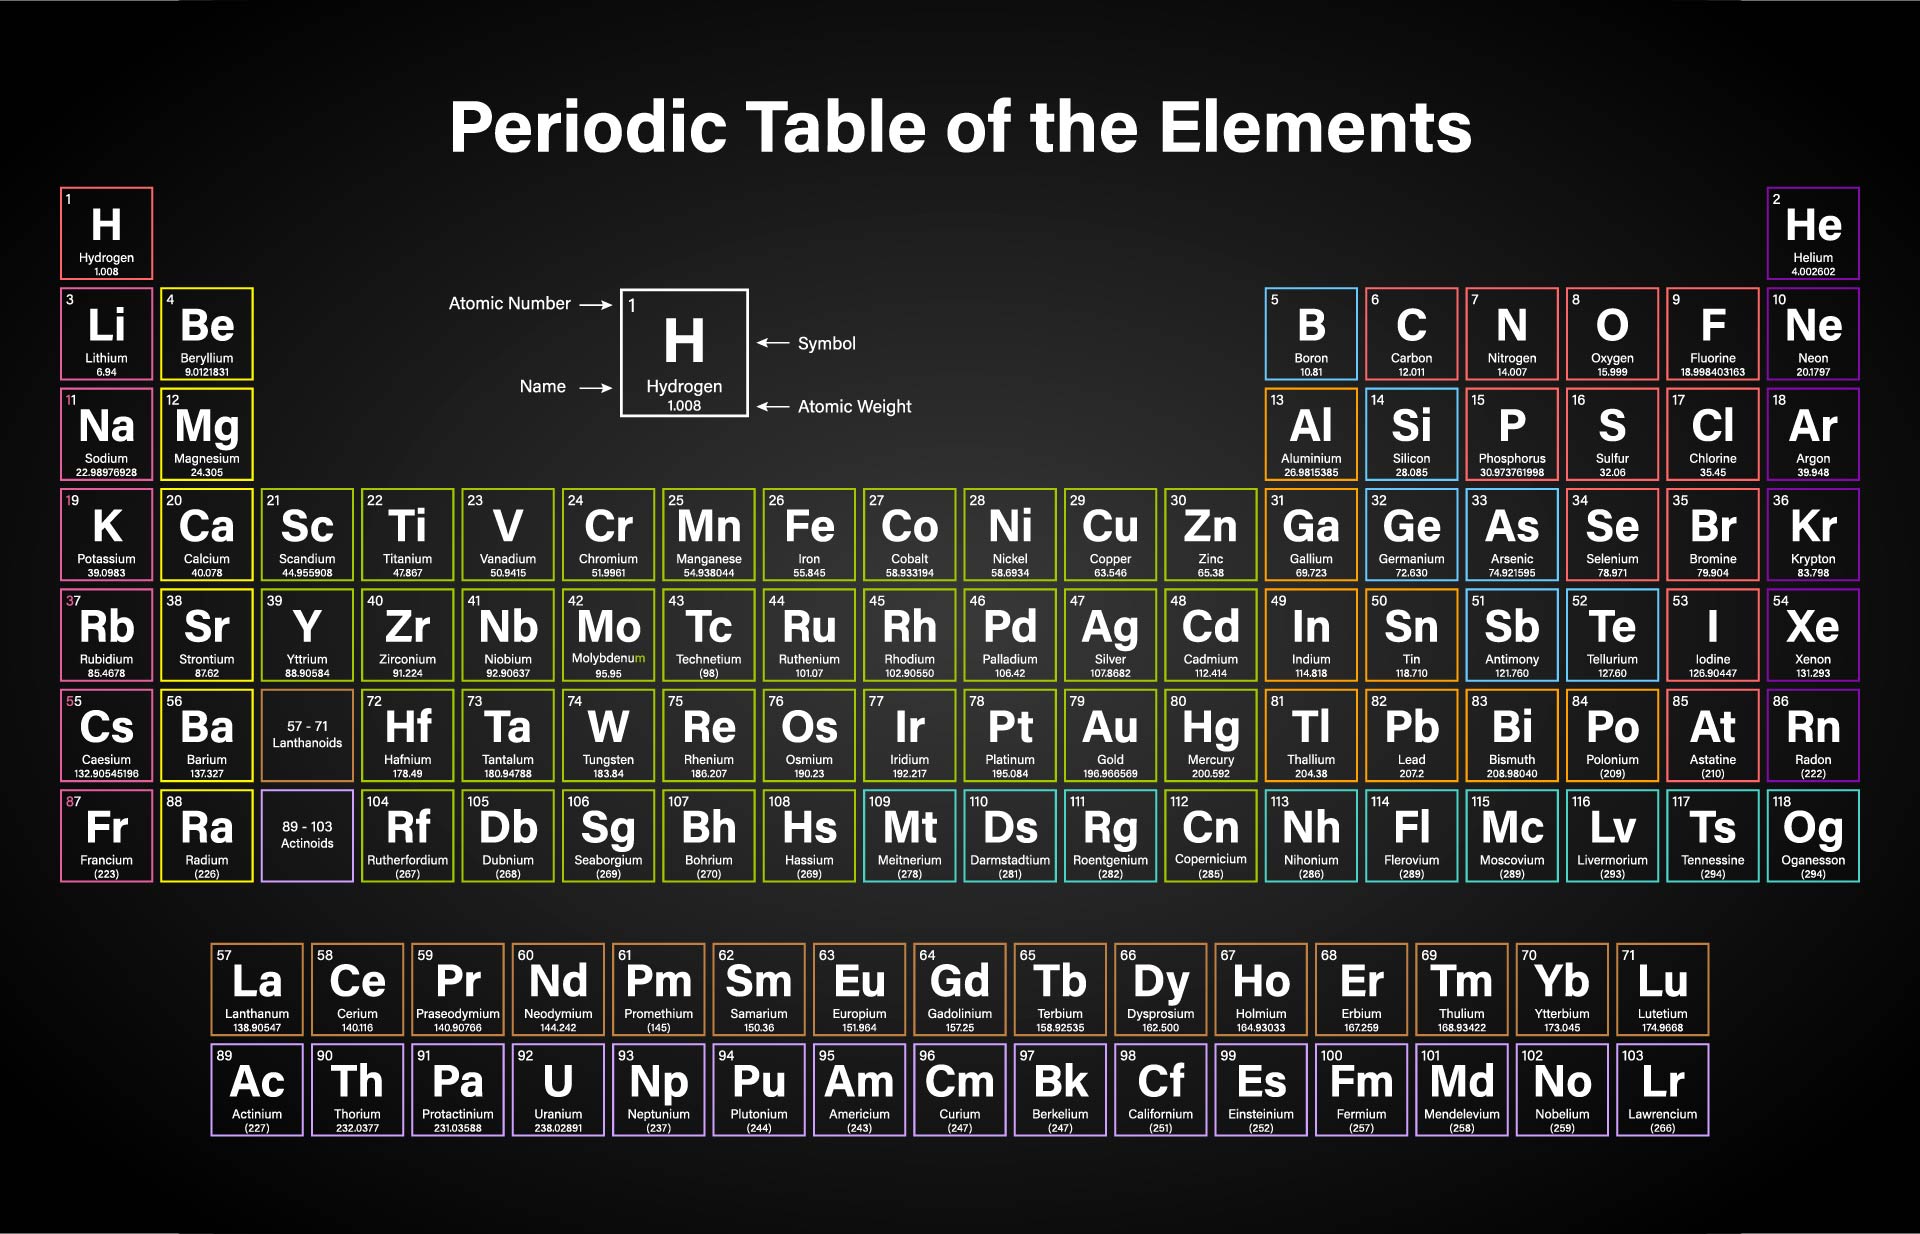 Periodic Table with Atomic Mass